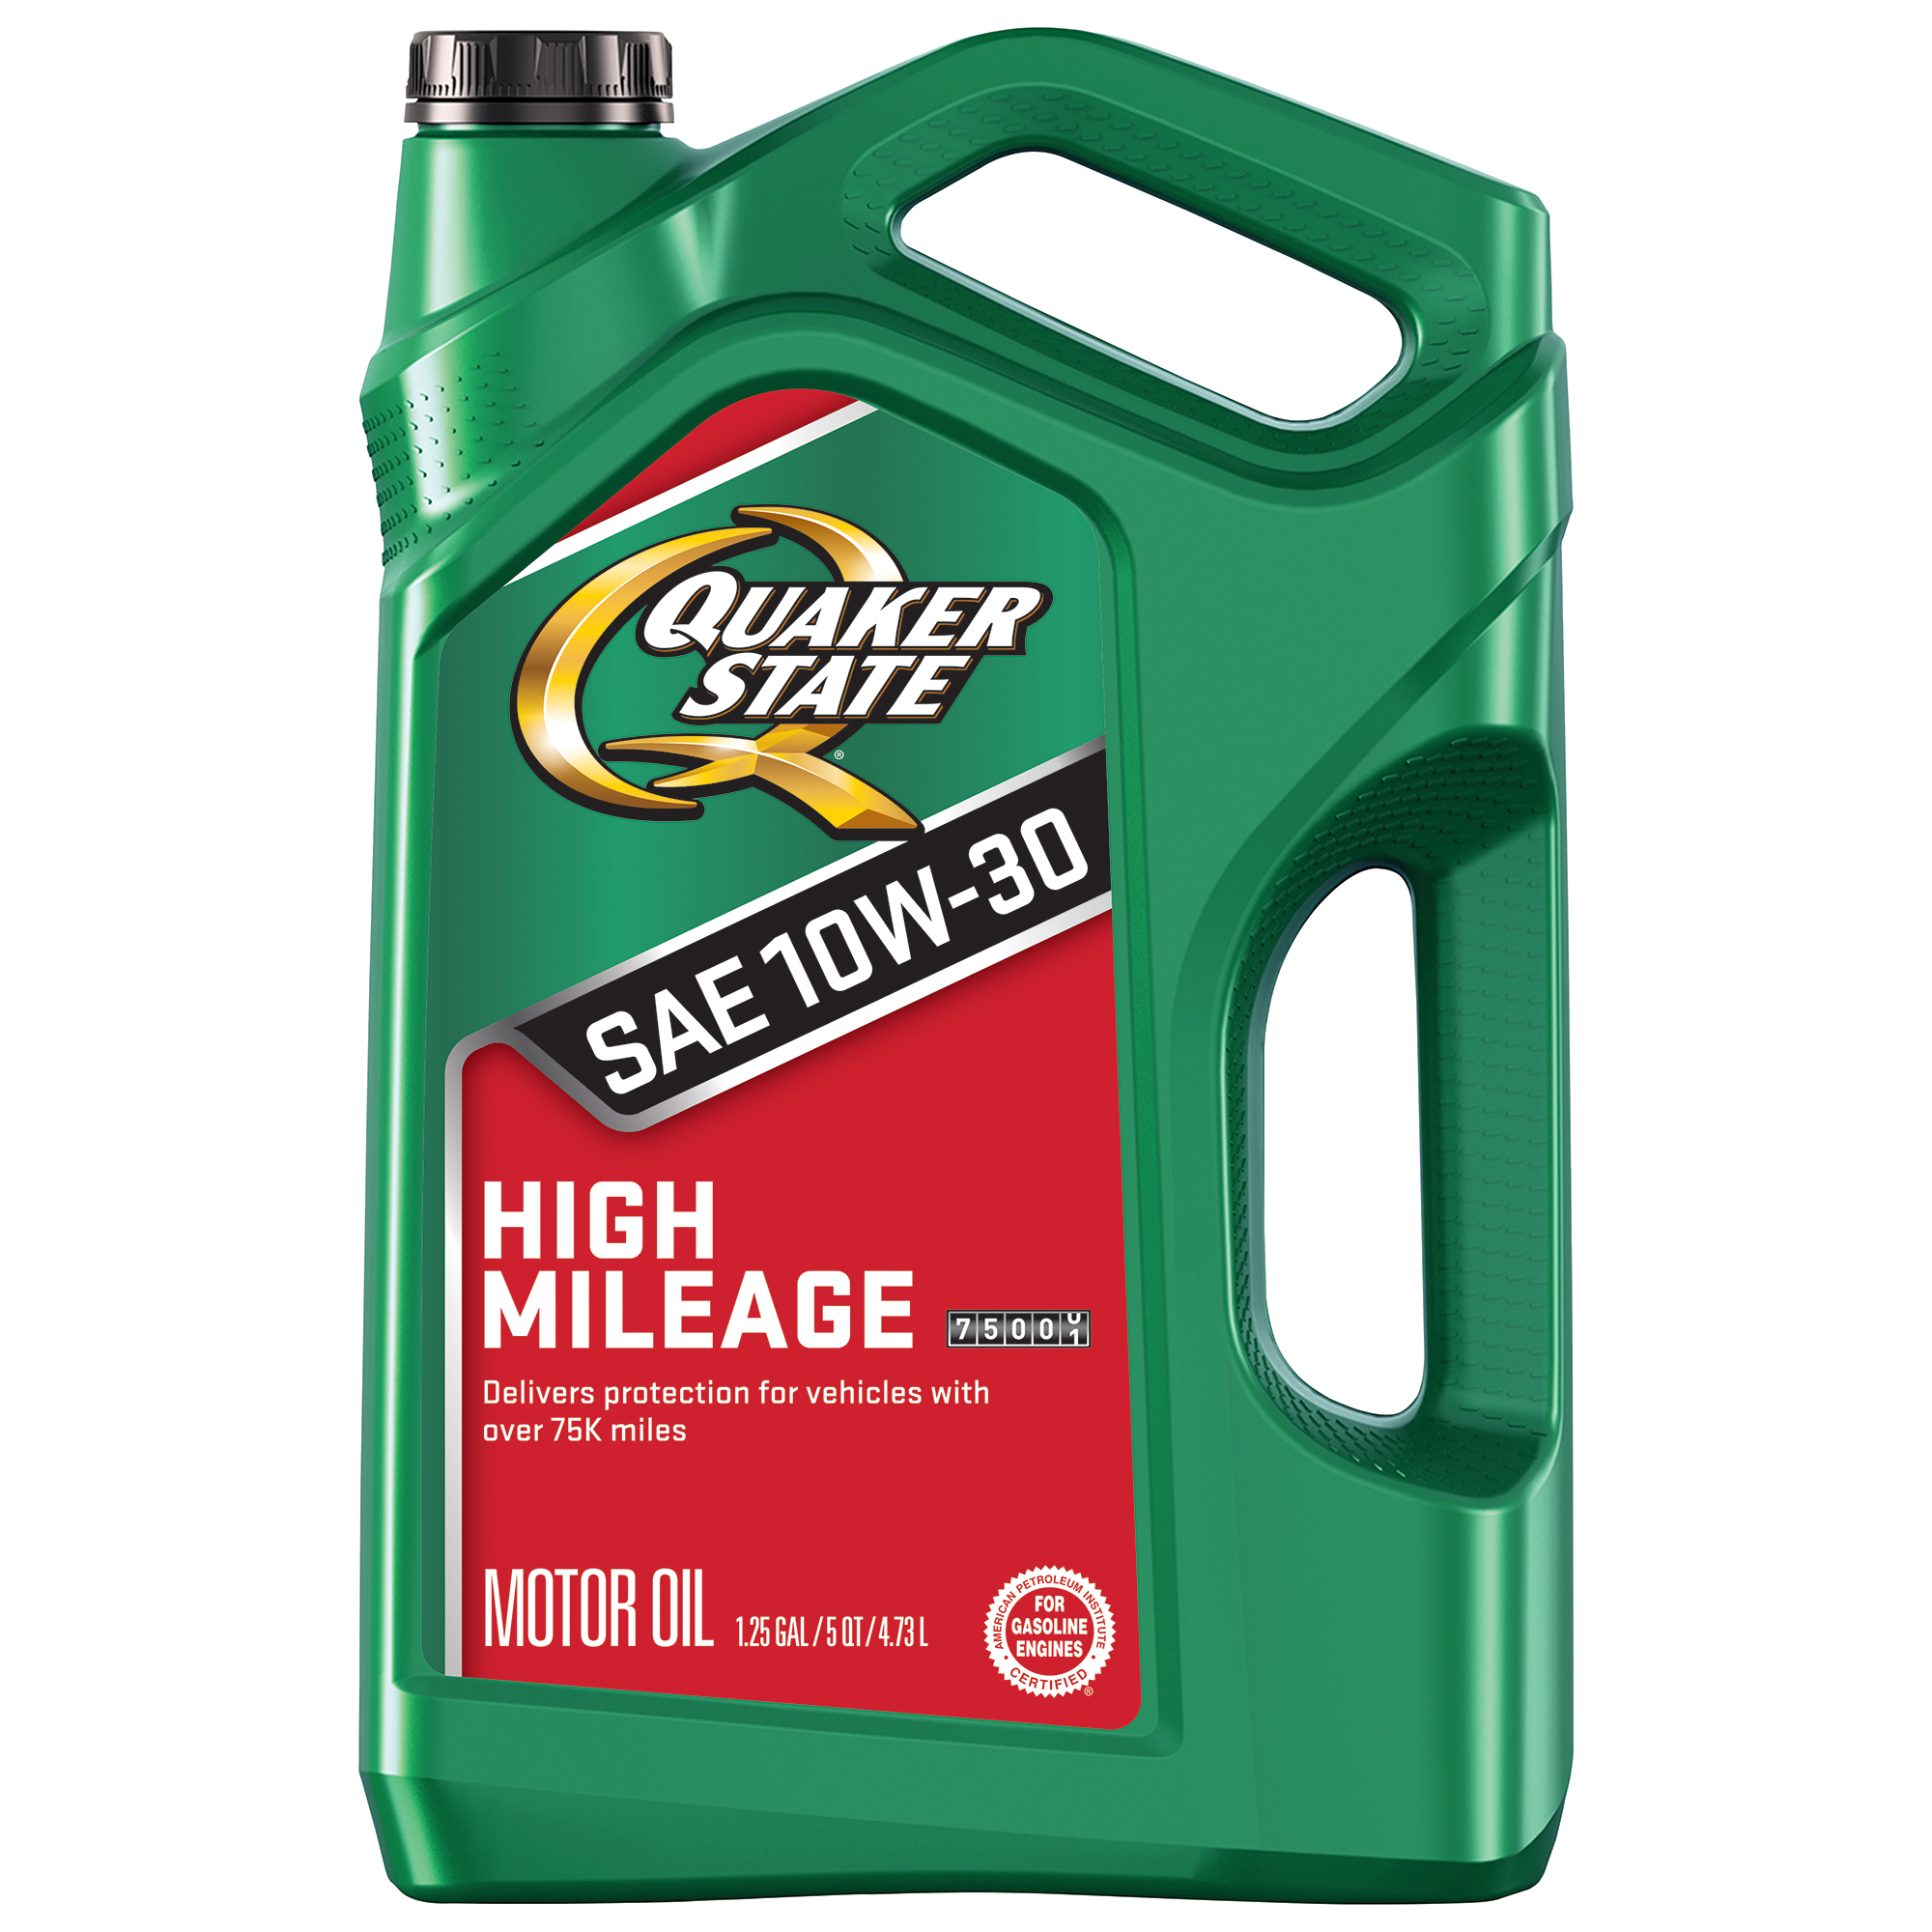 Quaker State High Mileage 10W-30 Synthetic Blend Motor Oil, 5 Quart - image 1 of 4